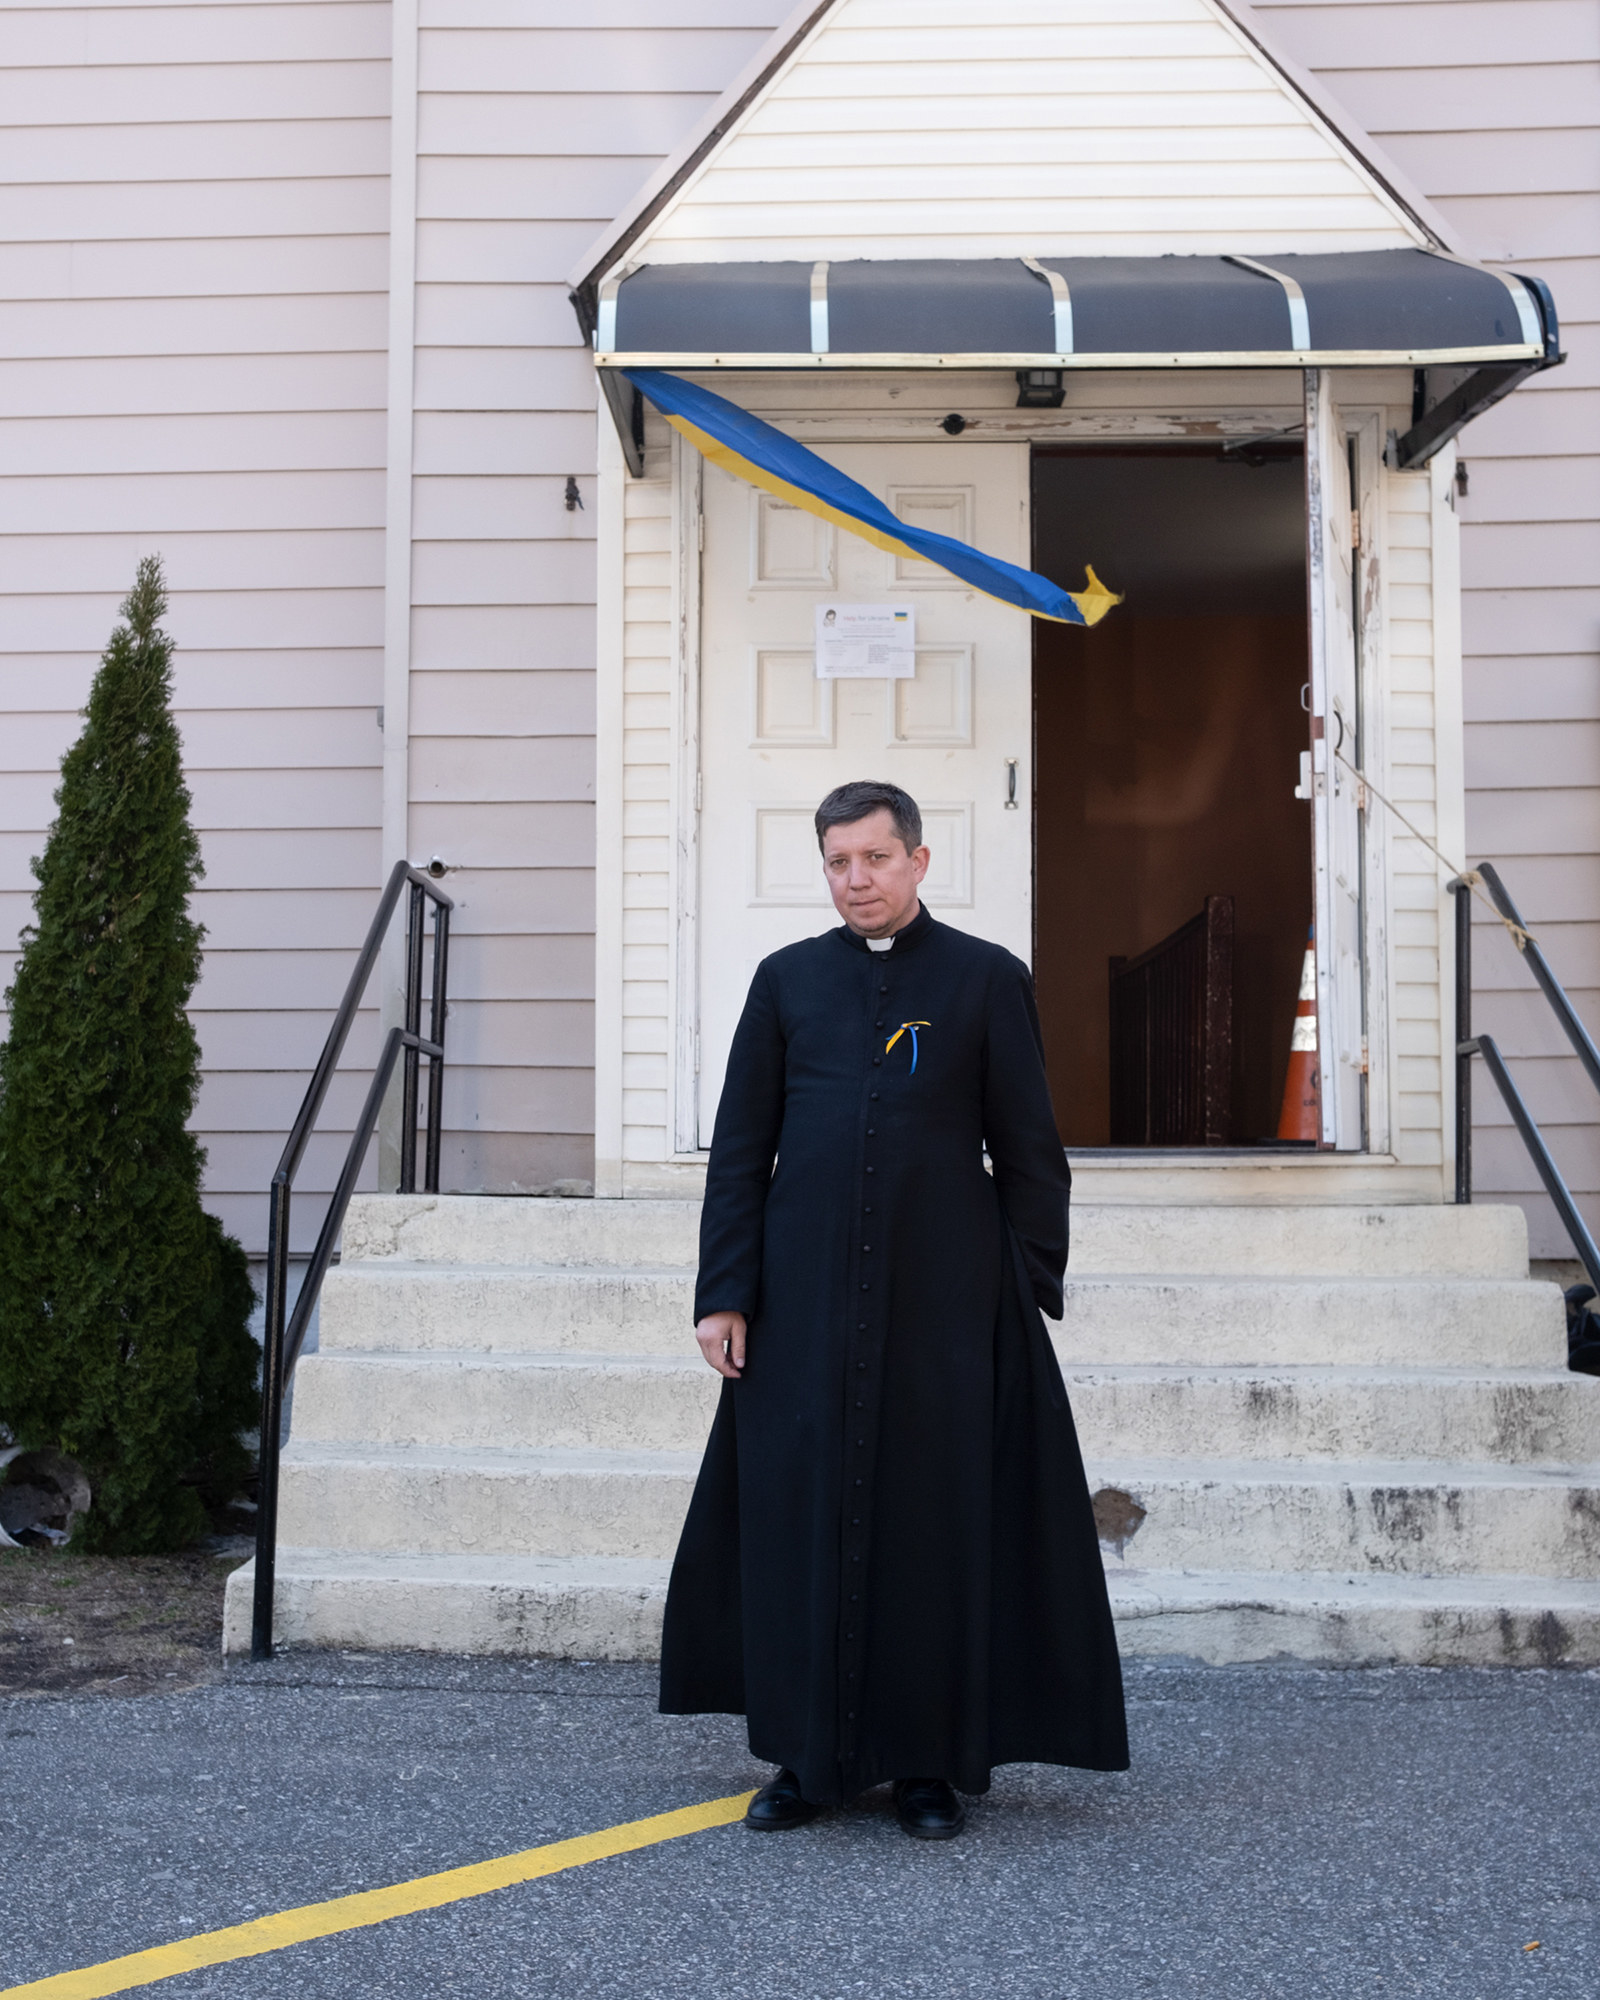 A priest stands in front of his church; a Ukrainian flag waves in front of the door